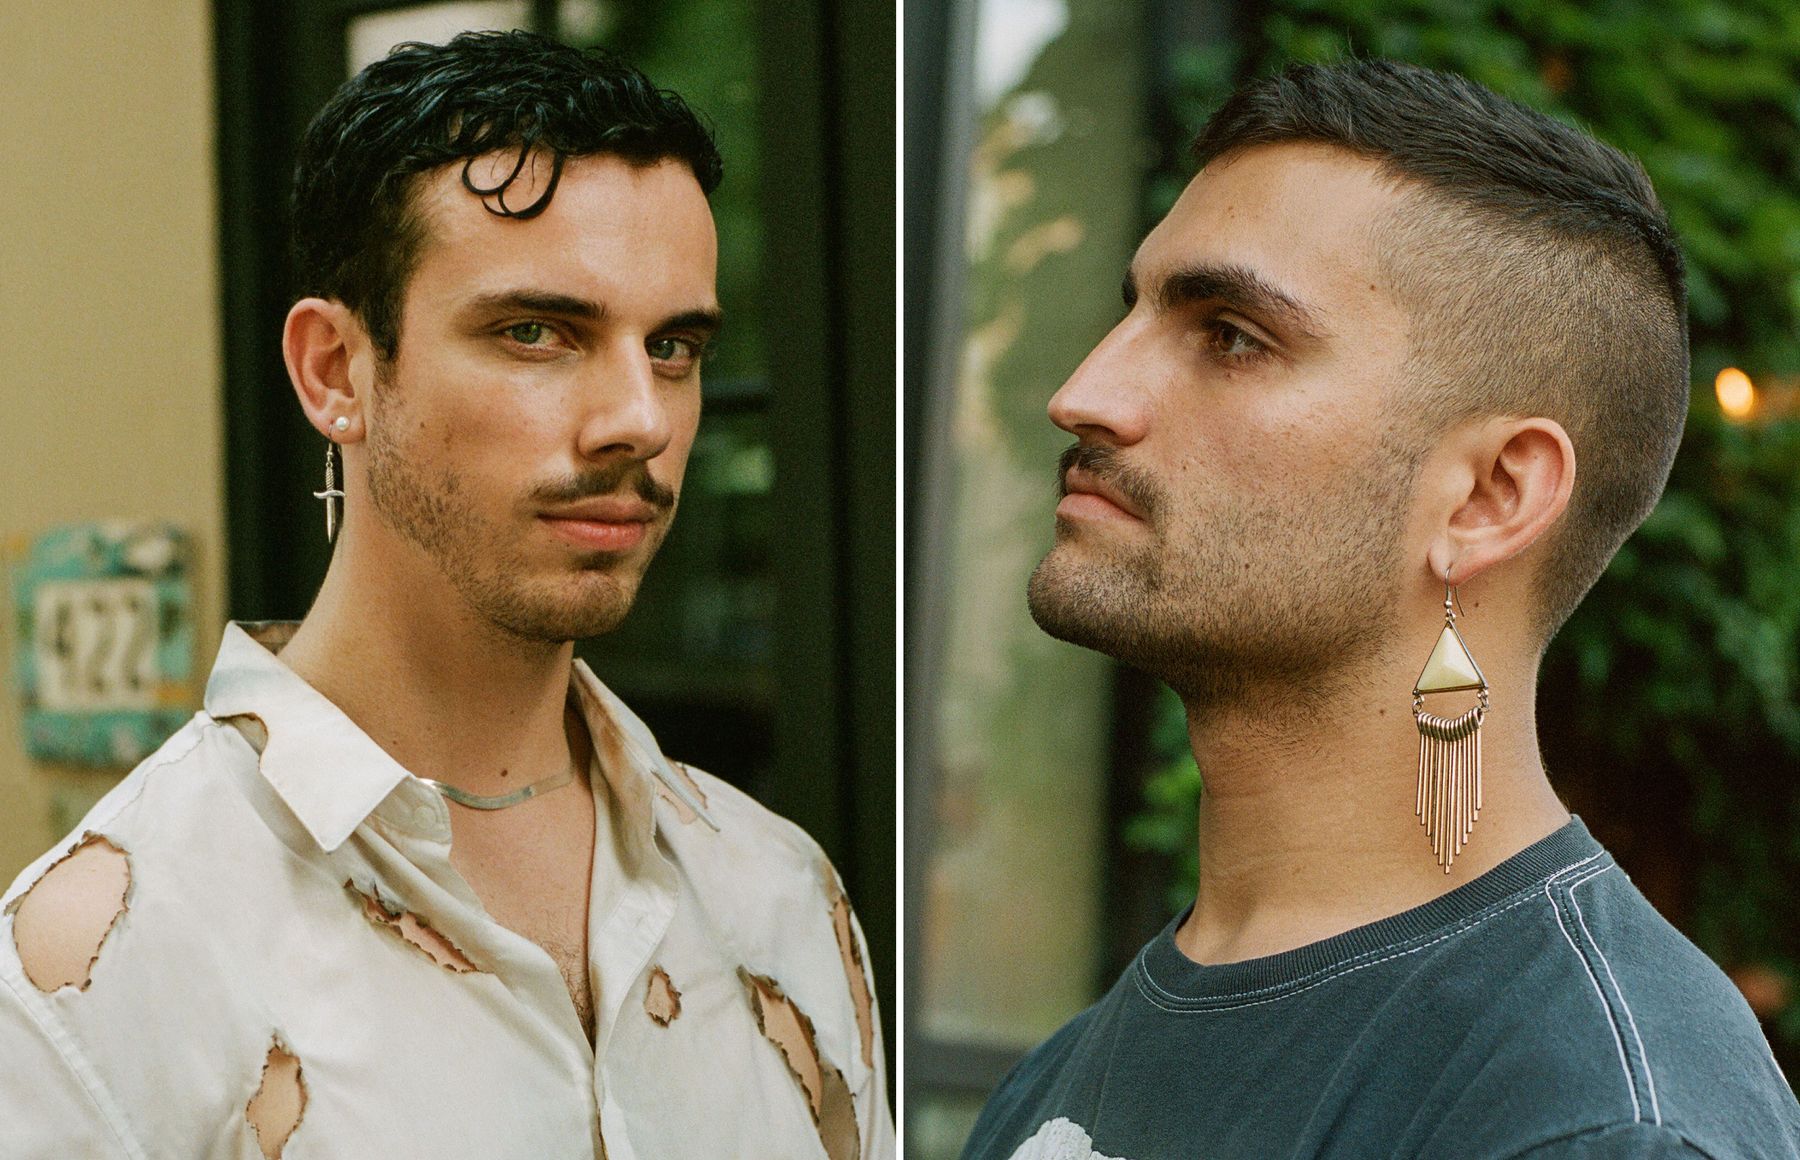 Which side is the gay side for earrings